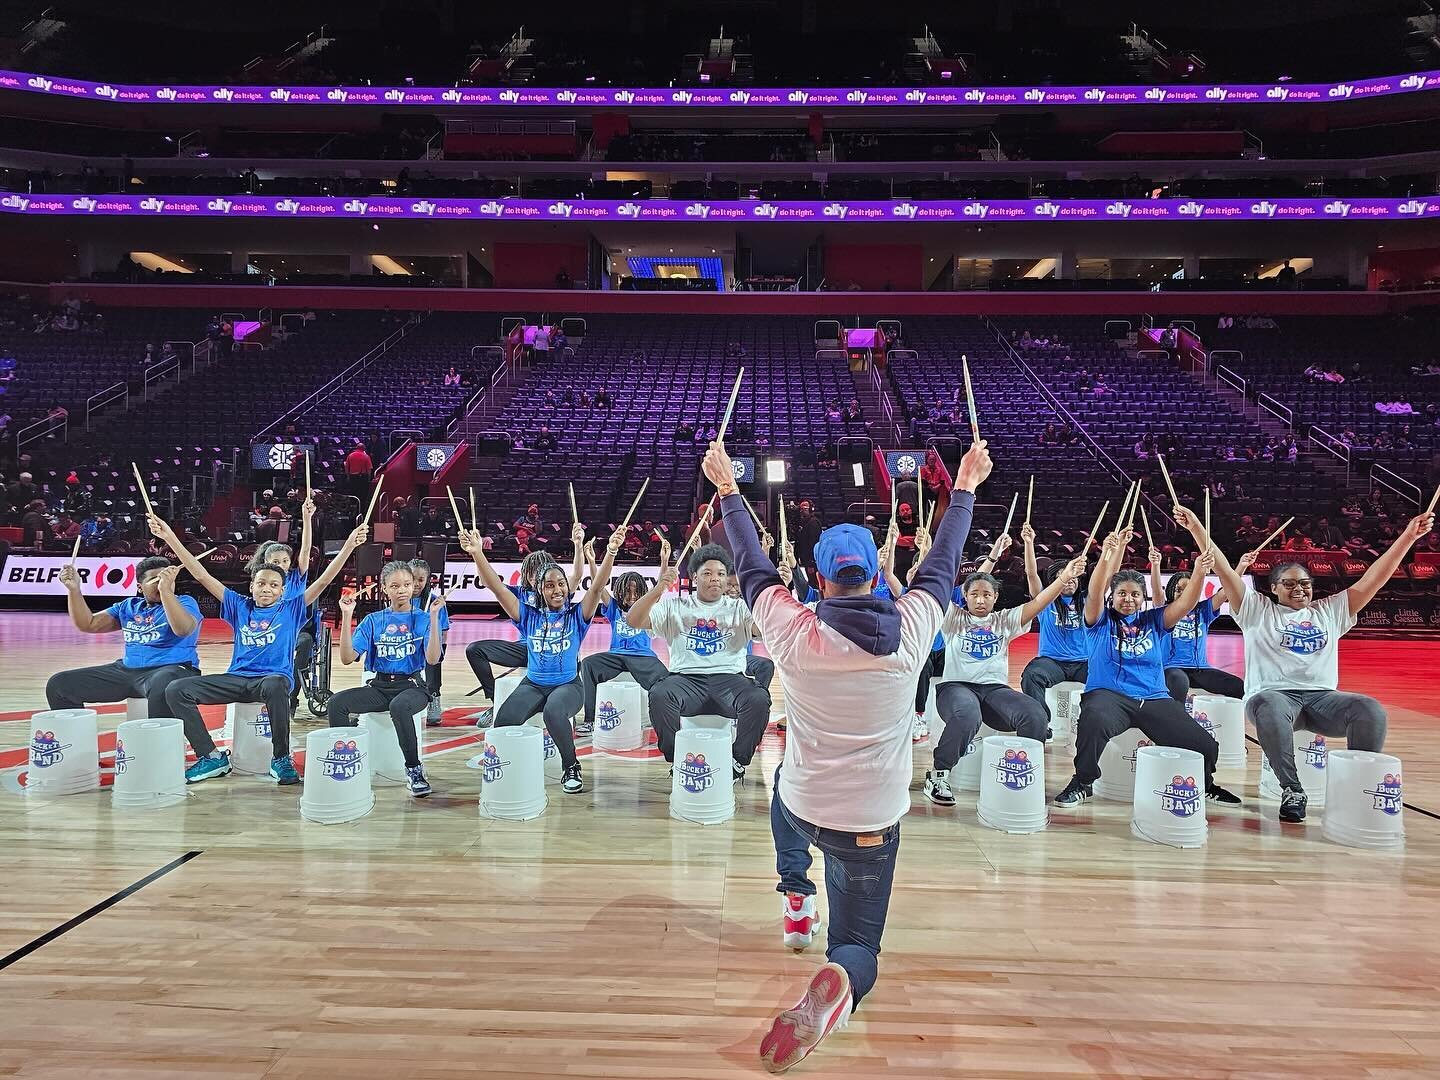 The infamous&nbsp;DAA Bucket Drum Band&nbsp;strikes again! This time they performed at the Pistons pregame show! 🤯 what!!!!

This was an unbelievable opportunity that we feel so fortunate to be a part of!&nbsp;Thank you to our very own Mr. Red, @det